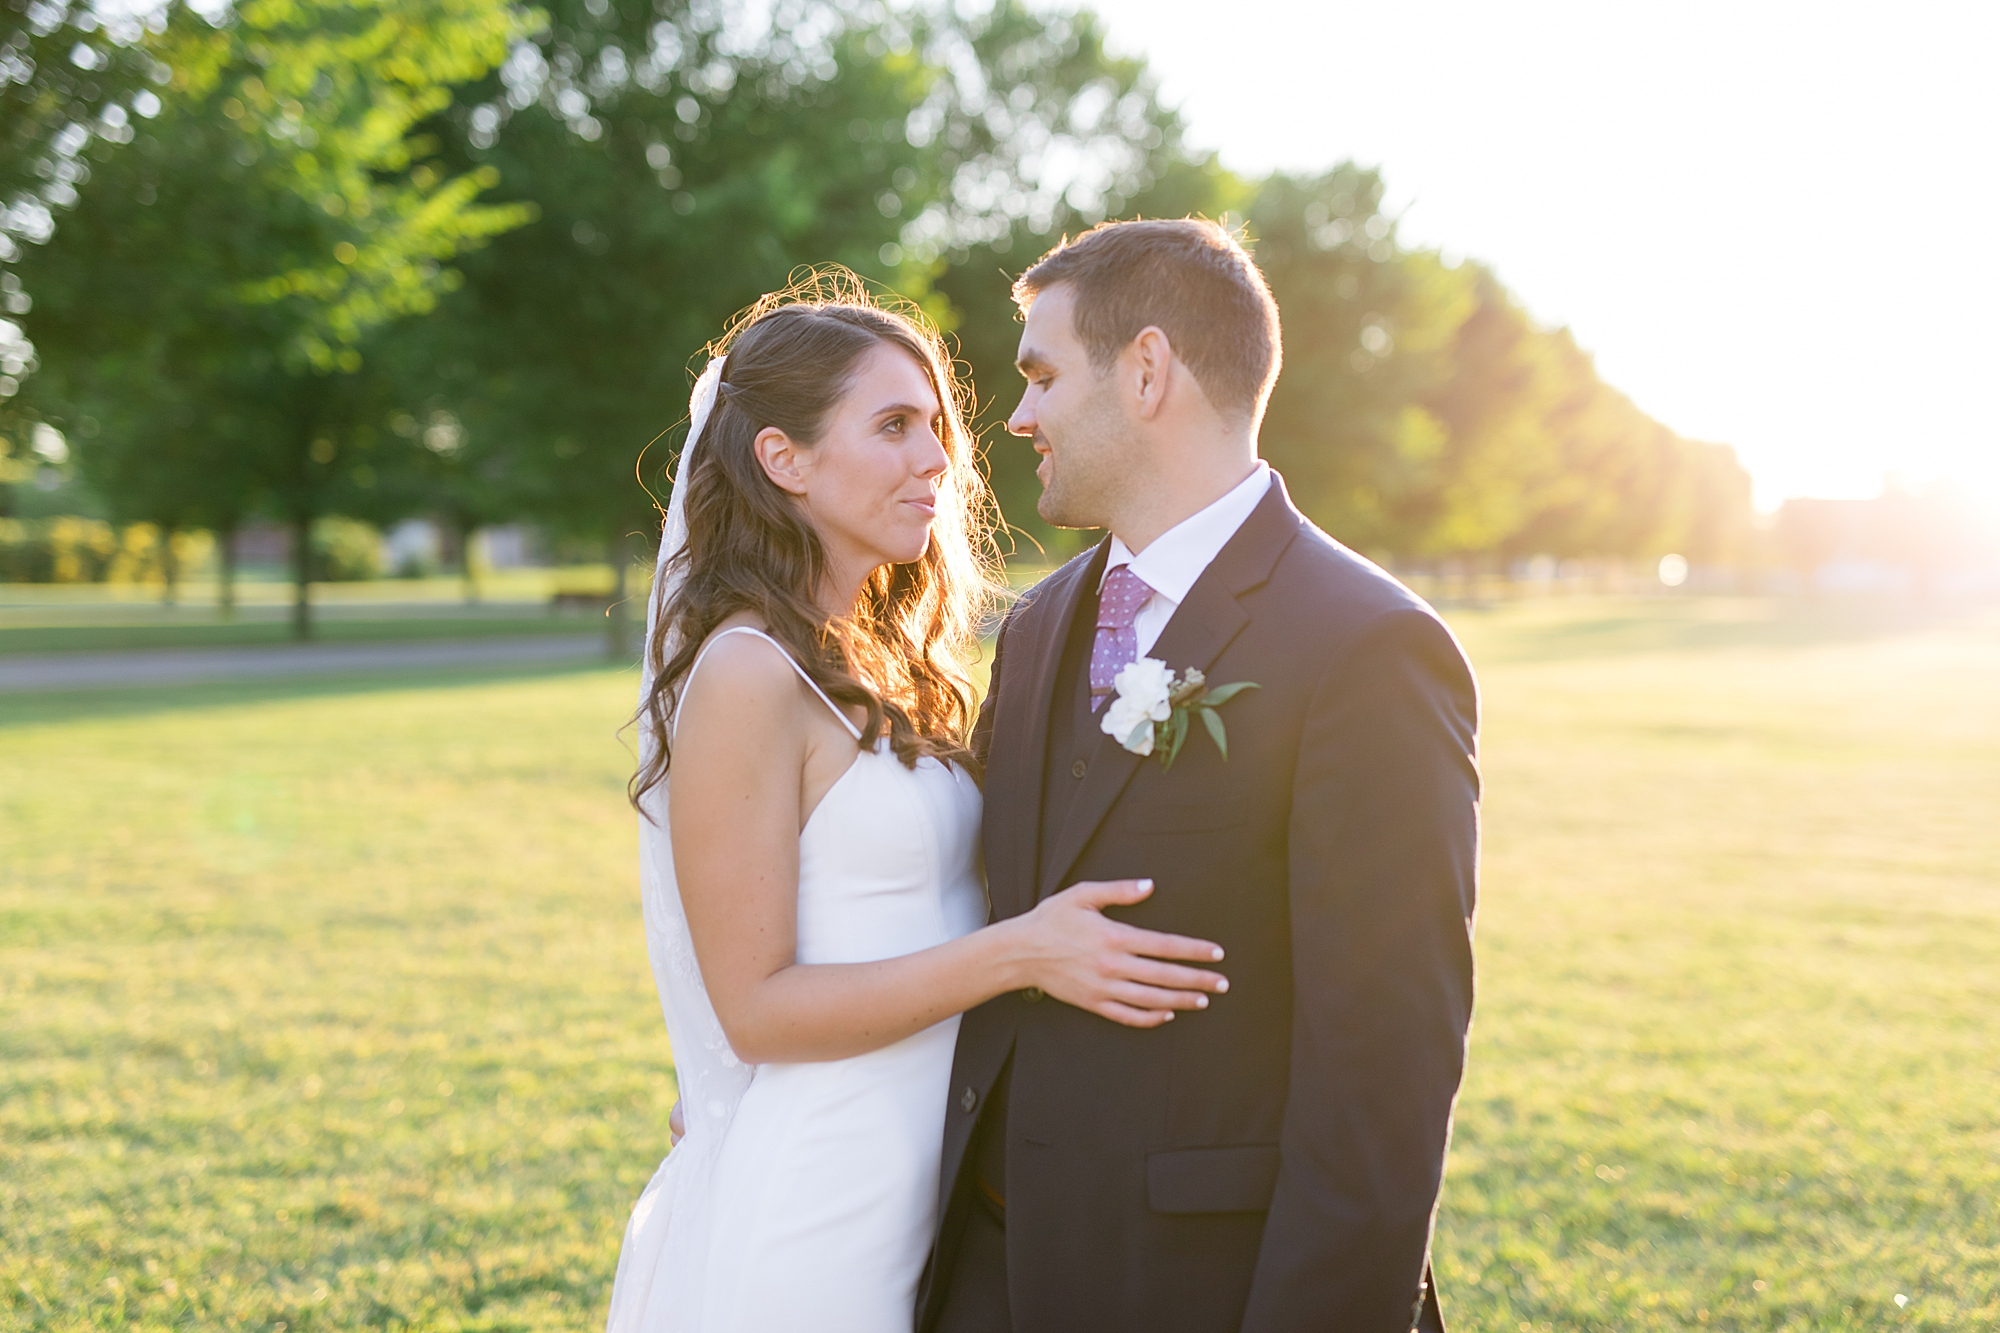 A romantic cream and mauve historic Packard Proving Grounds wedding filled with greenery and sunshine by Breanne Rochelle Photography.